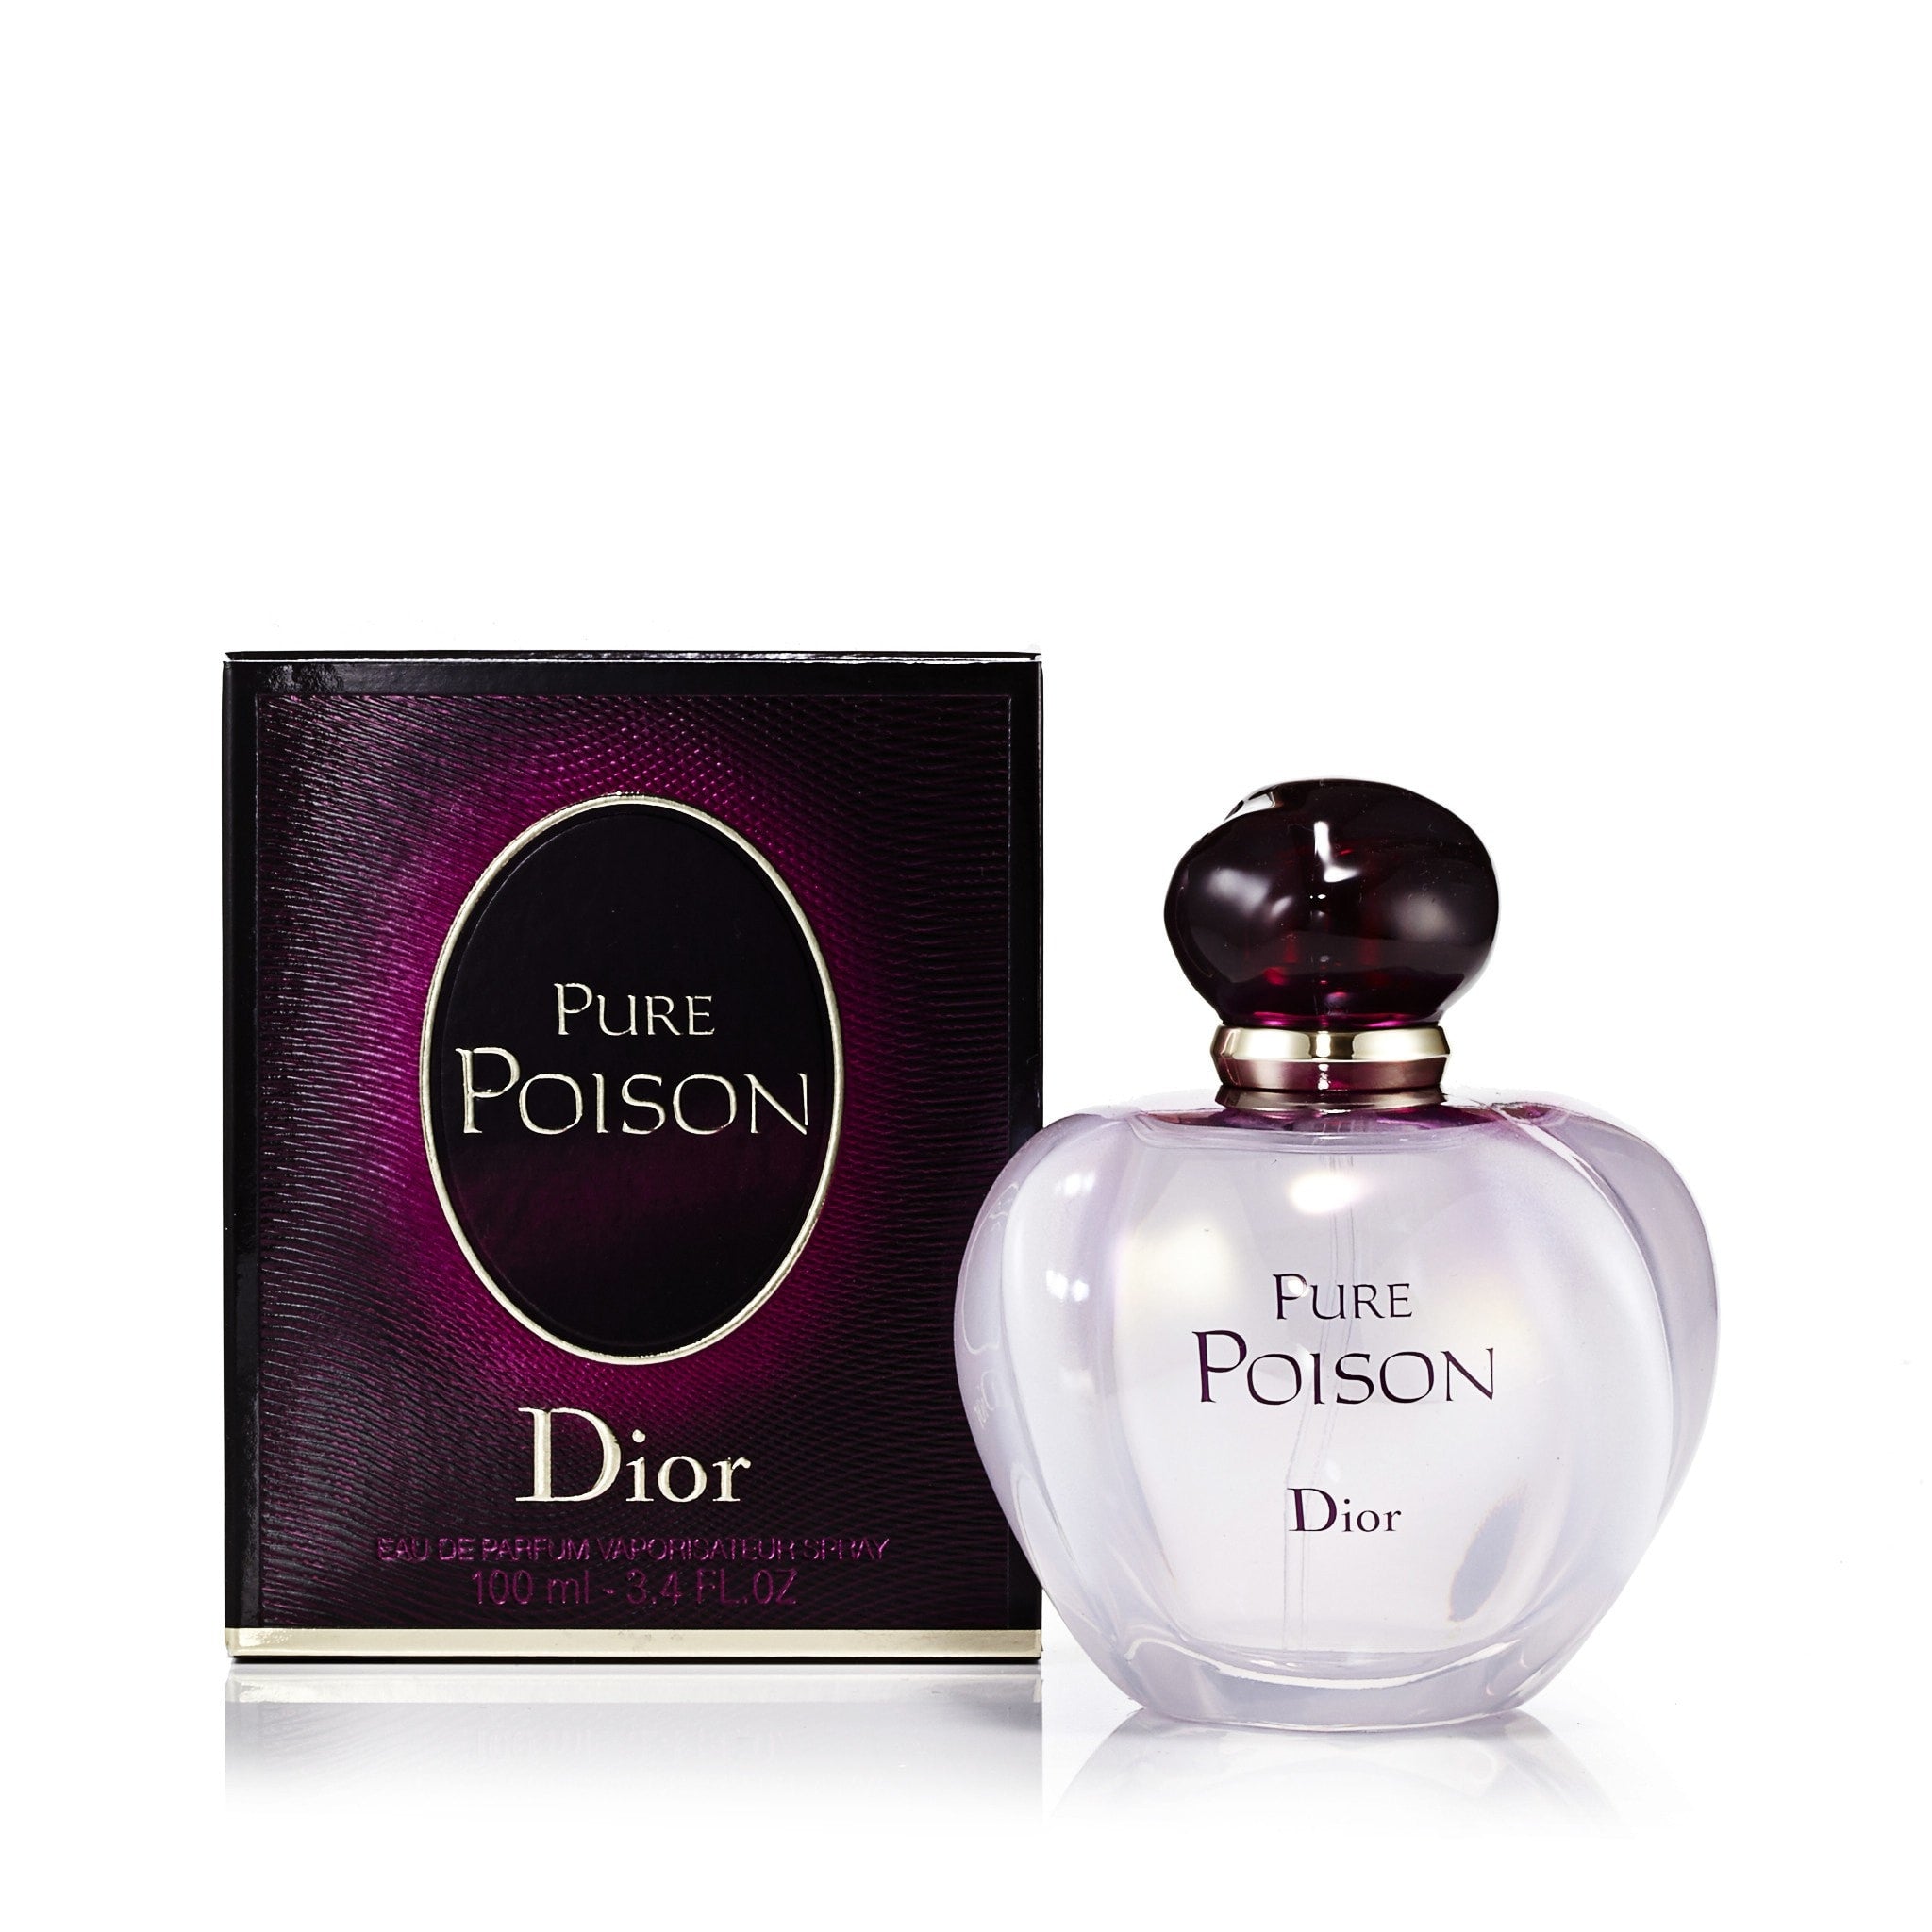 Christian Dior Pure Poison Review (2004)